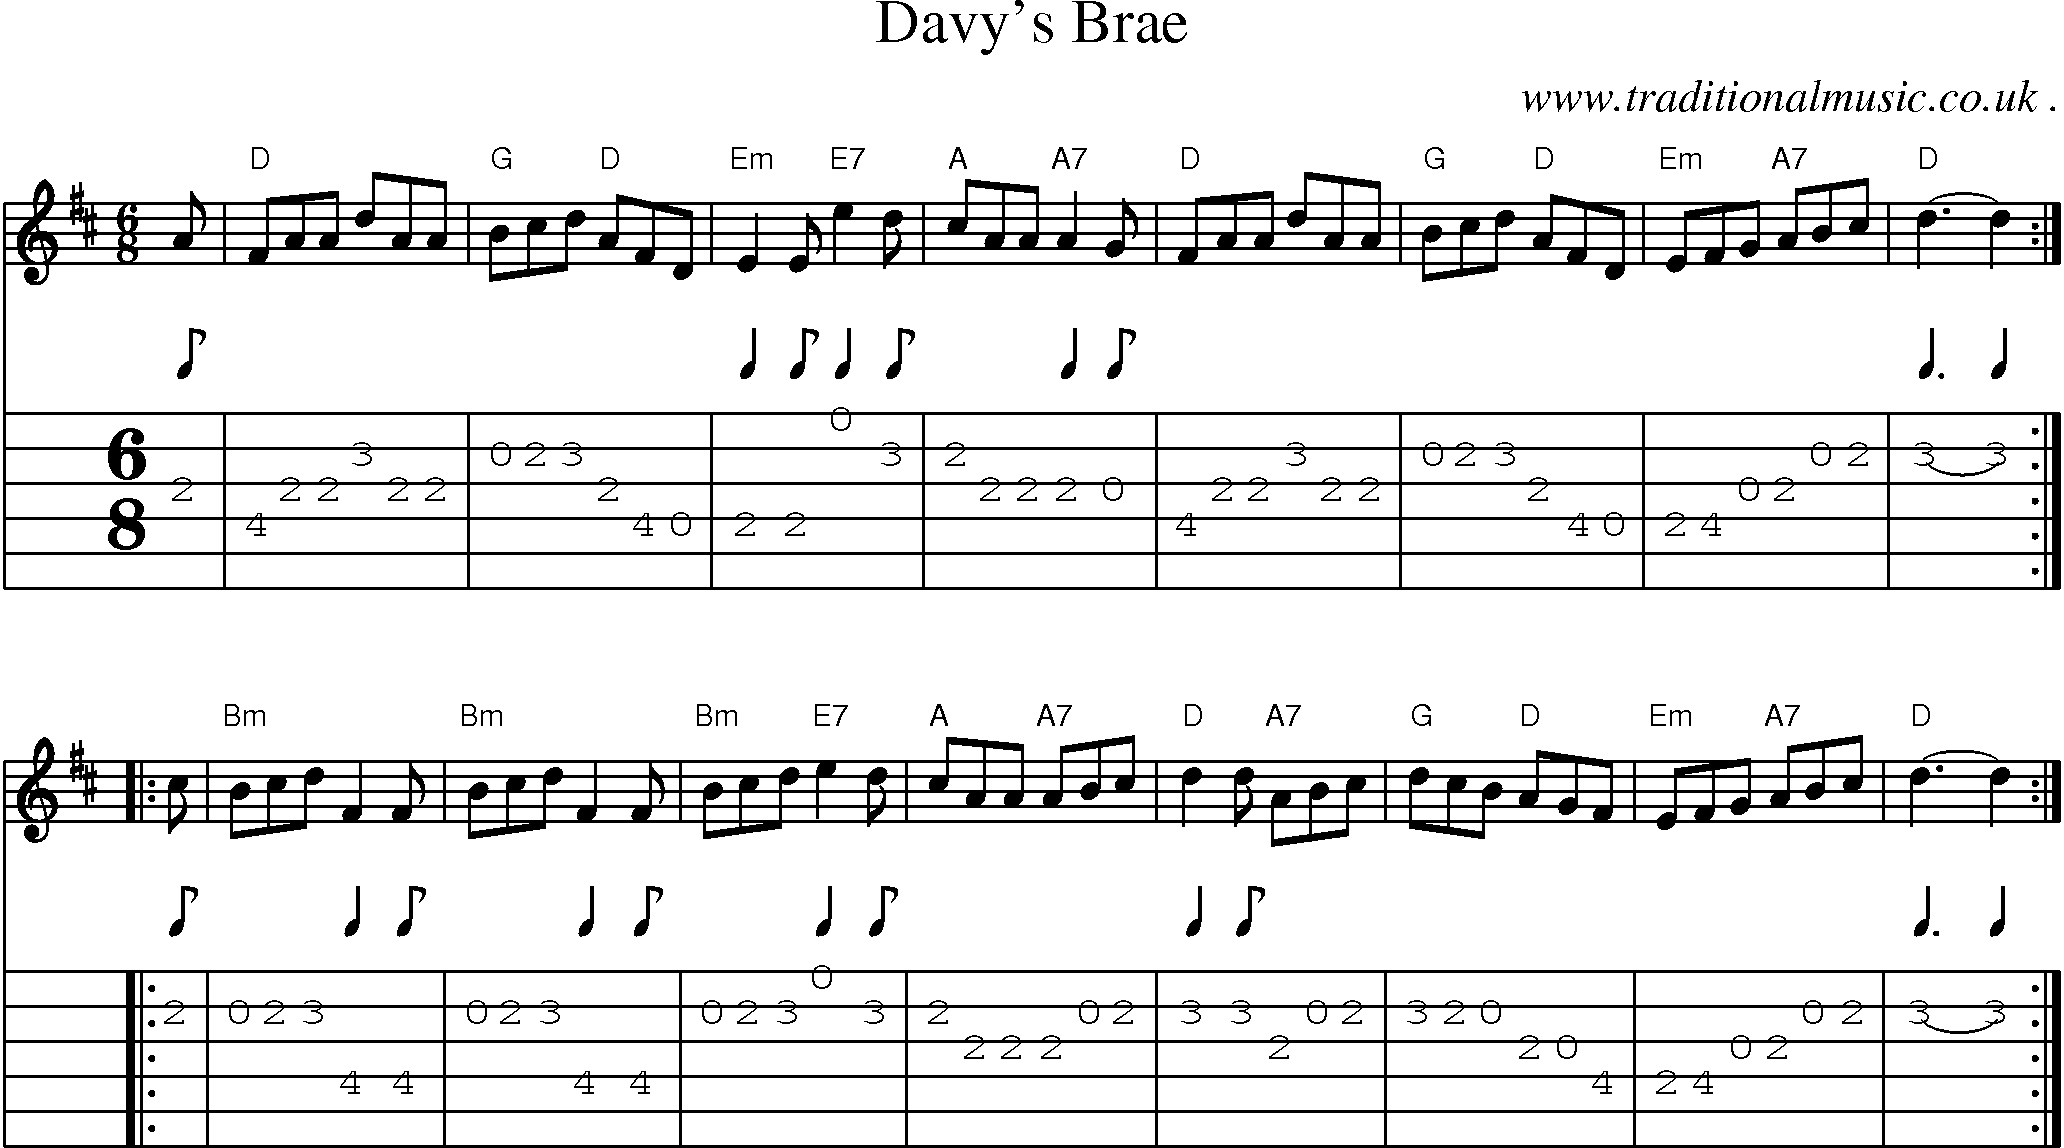 Sheet-music  score, Chords and Guitar Tabs for Davys Brae